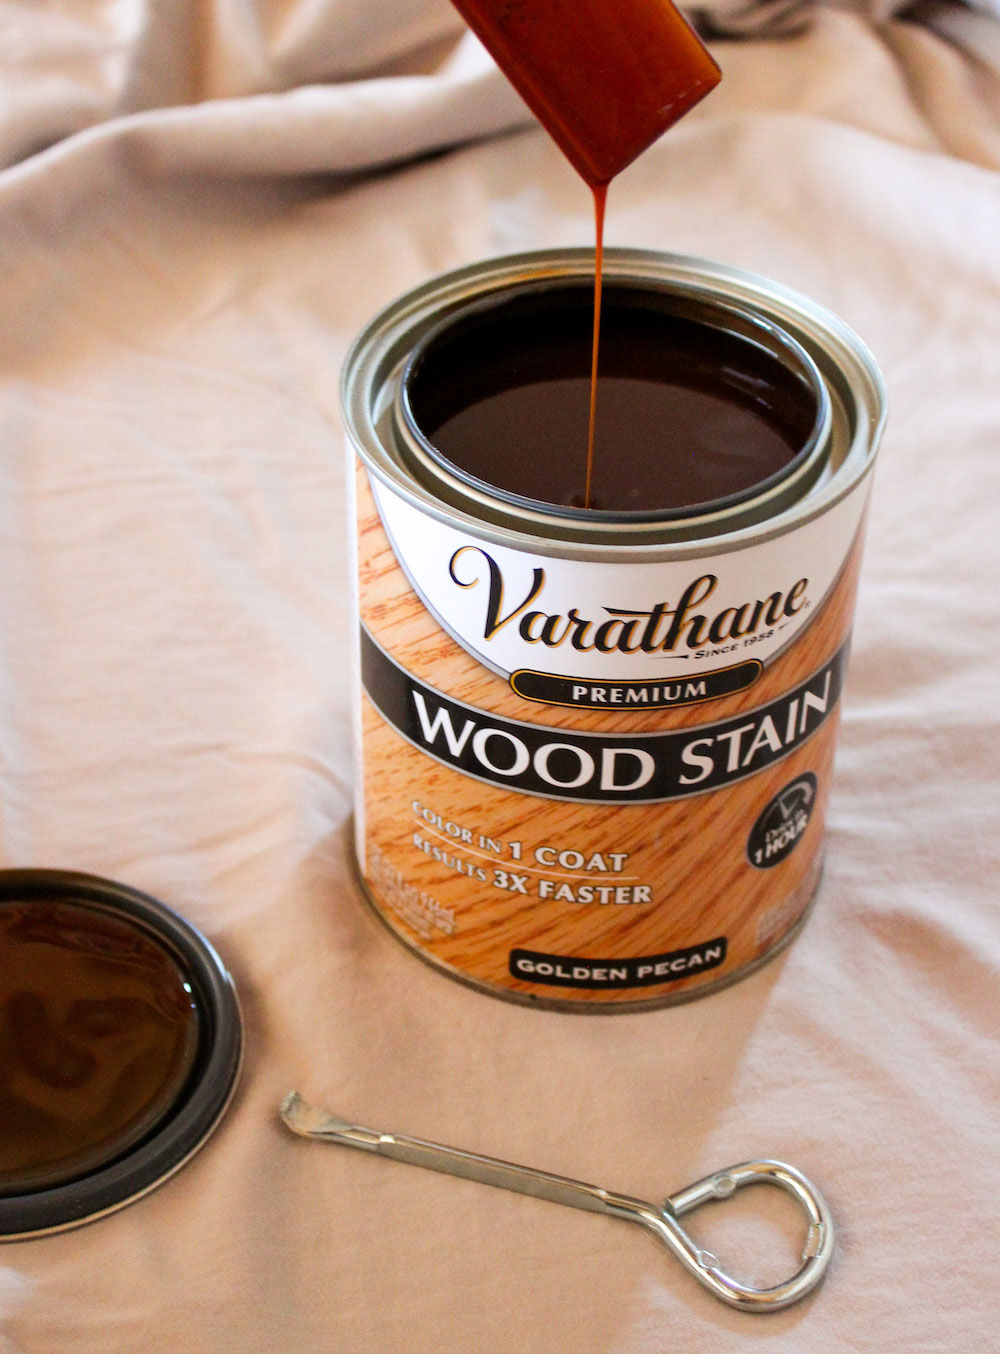 A paintbrush drips golden pecan Varathane wood stain into a can.